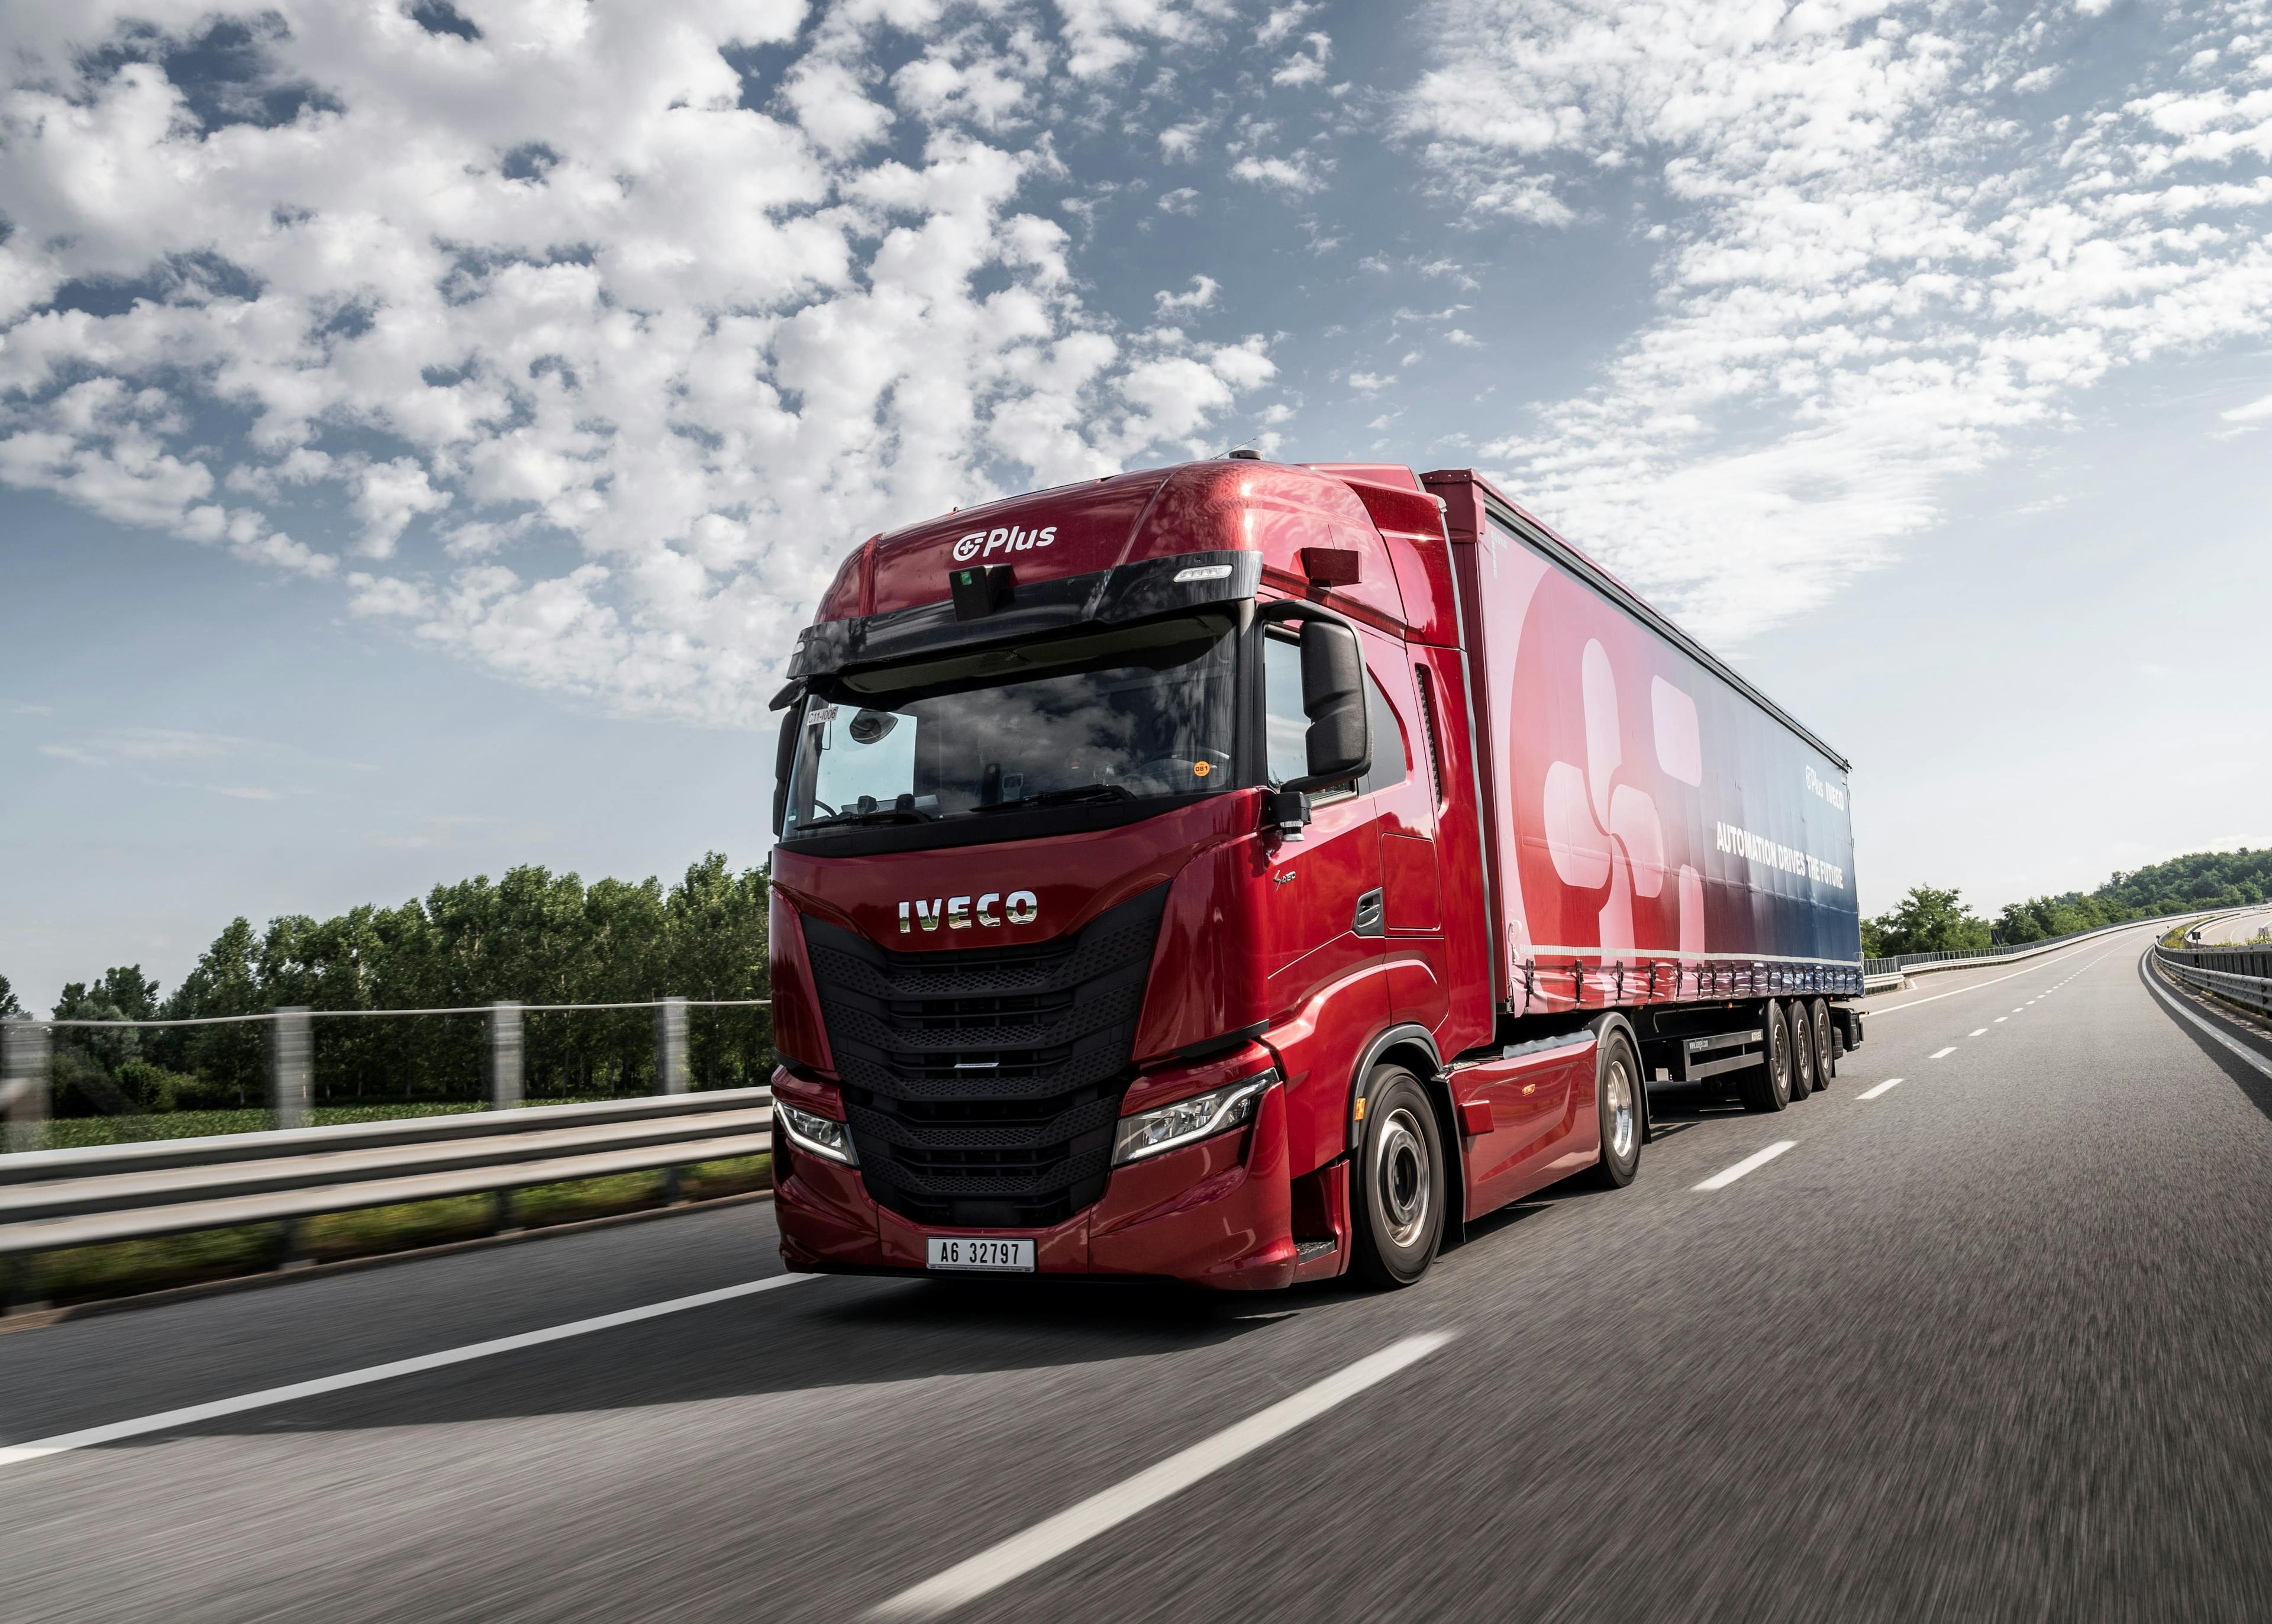 Next-Gen Highly Automated Truck Jointly Developed by Iveco and Plus